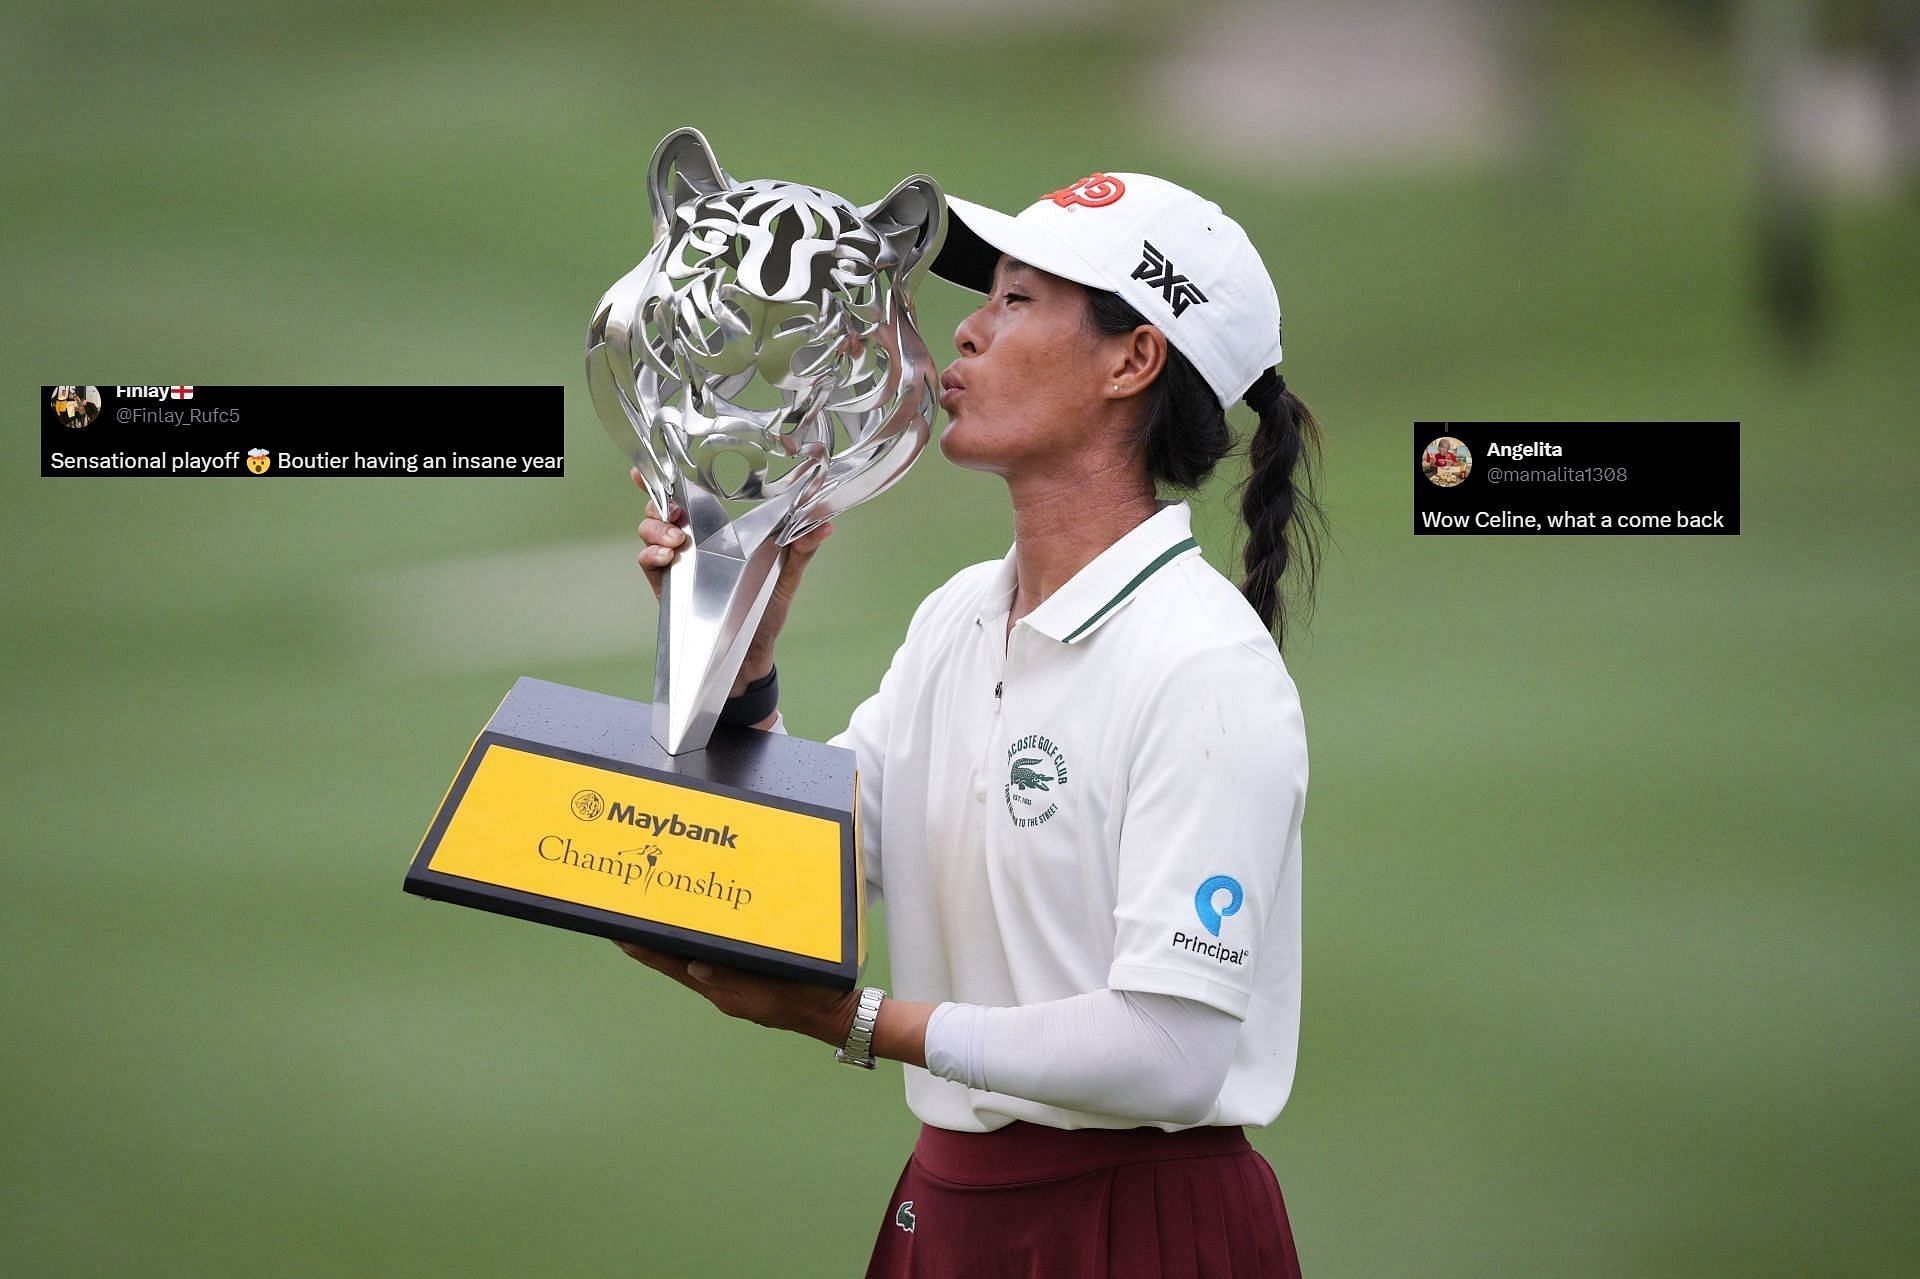 Celine Boutier wins the inaugural Maybank Championship 2023 (Image via Getty)